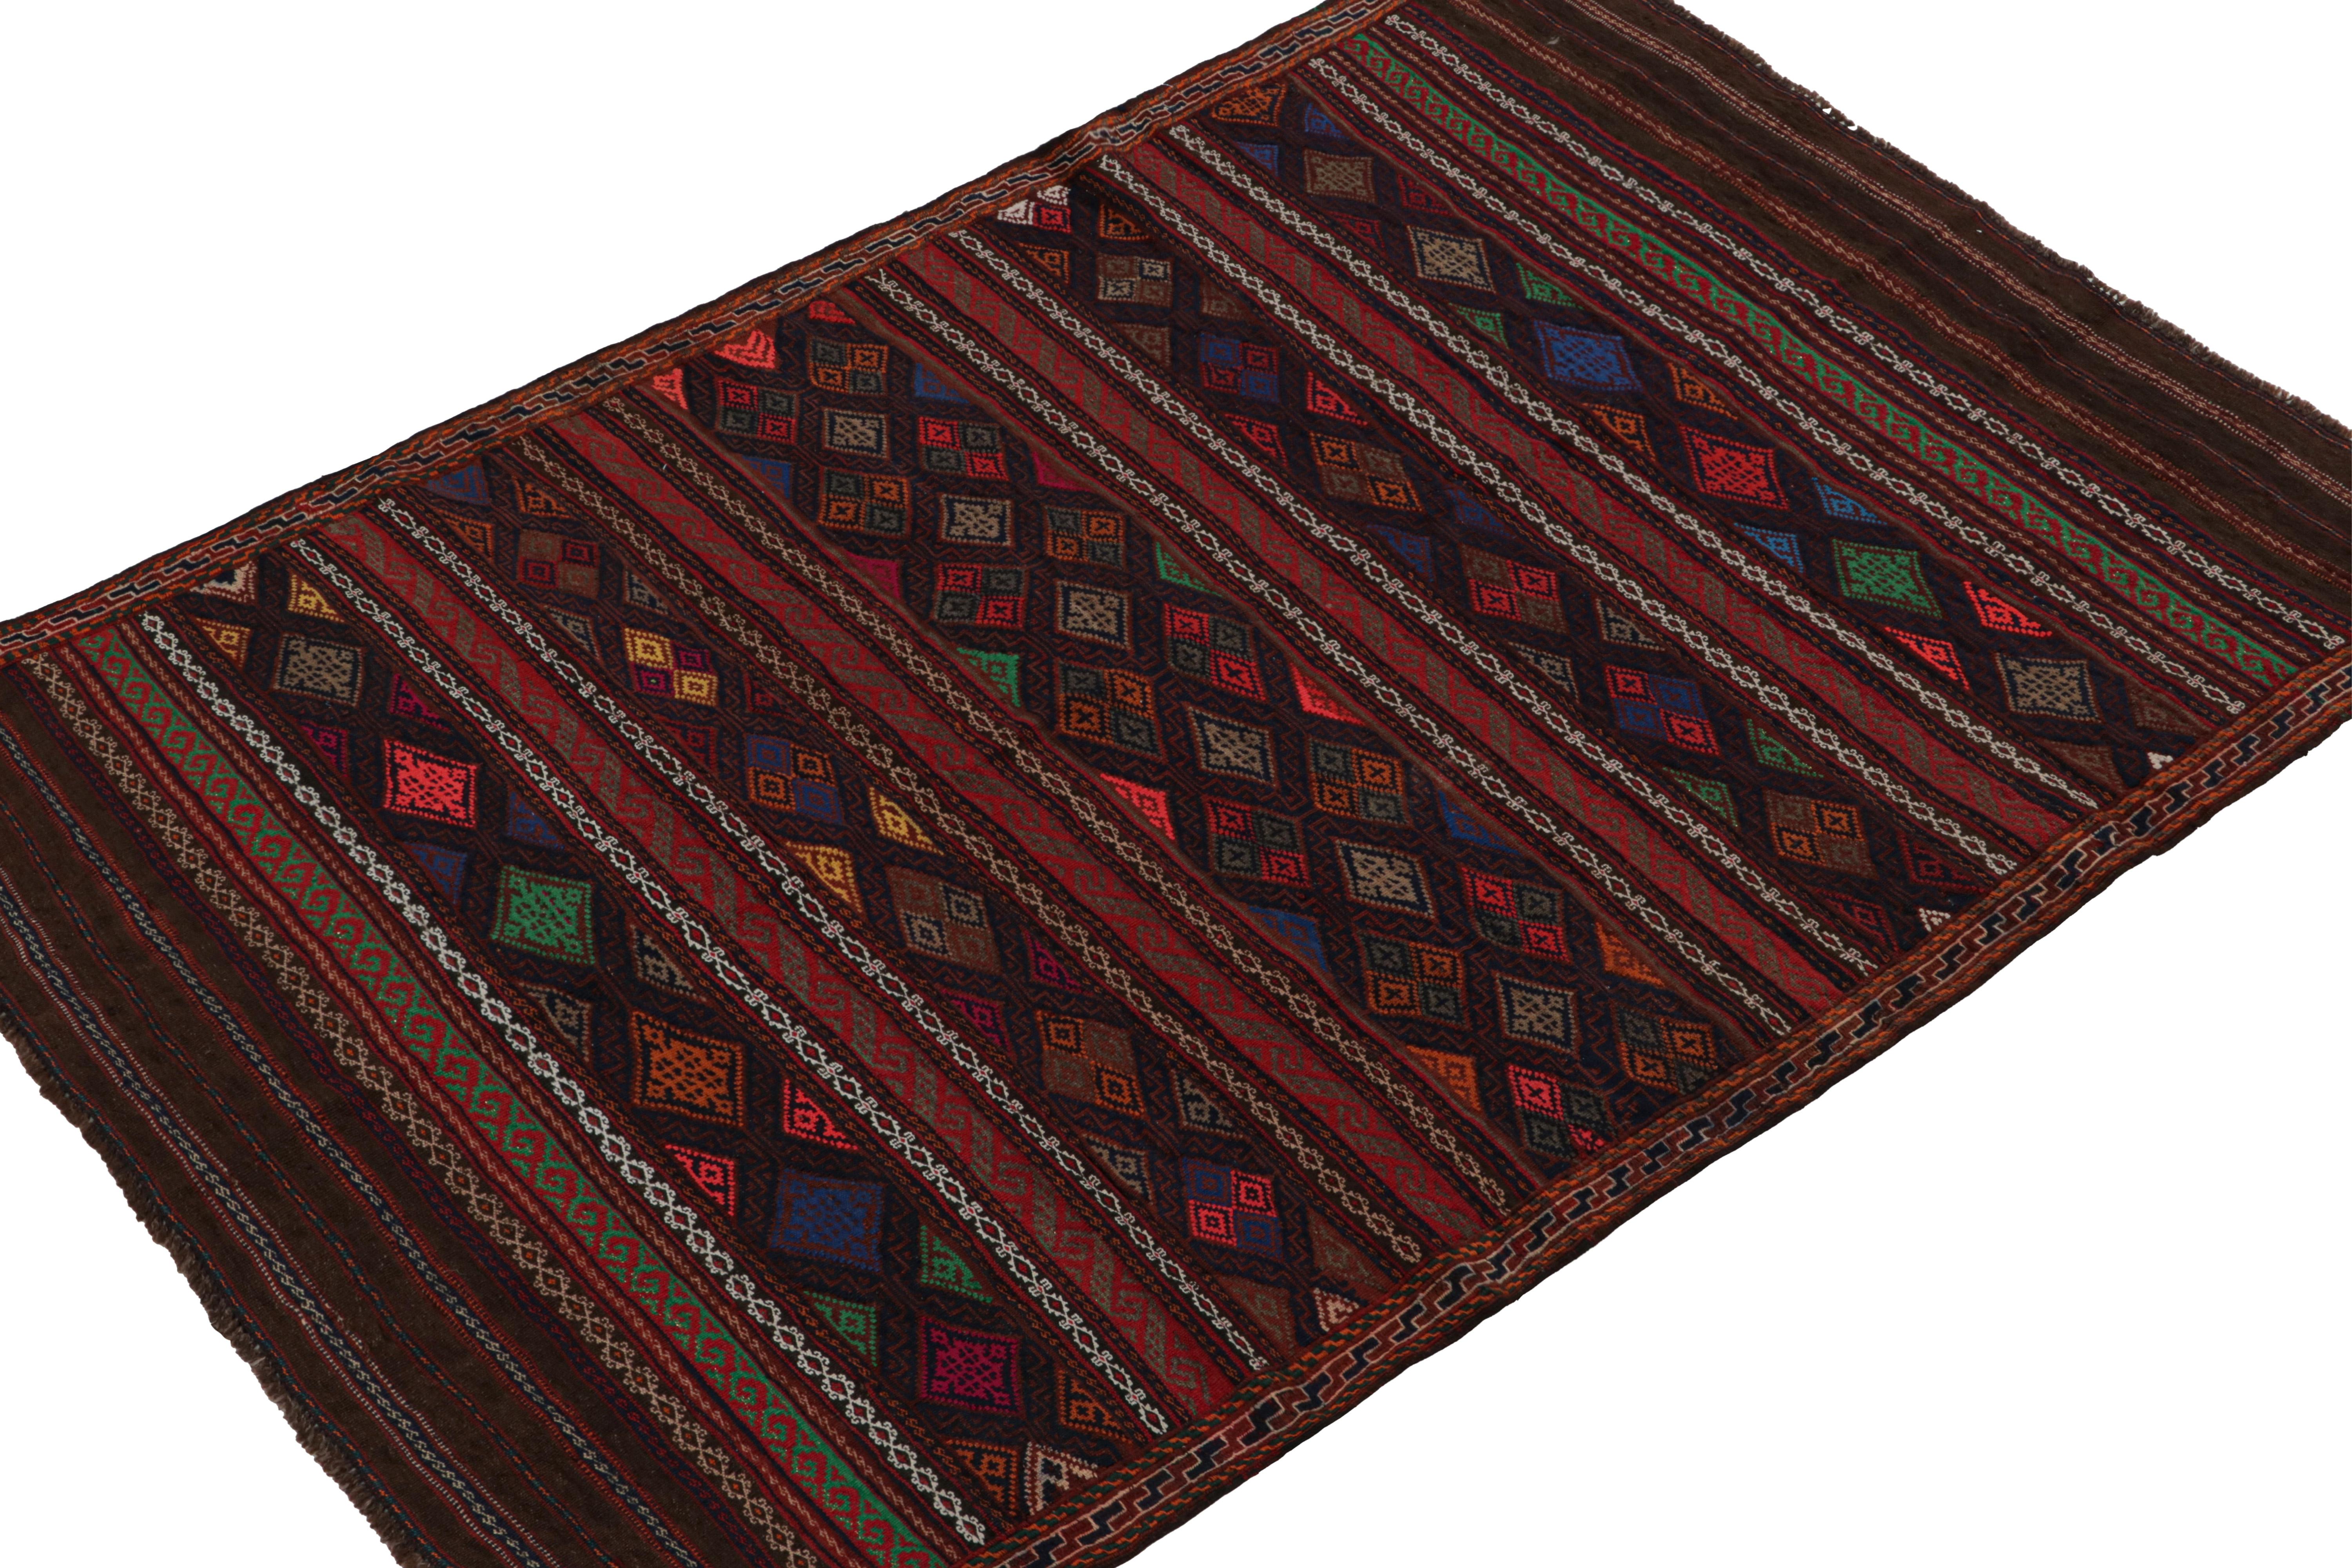 Handwoven in wool circa 1950-1960, this vintage tribal kilim rug from the Baluch tribe is the latest to join Rug & Kilim’s collection of coveted flatweaves. 

On the Design: 

Specifically believed to hail from the Leghari clan of this nomadic